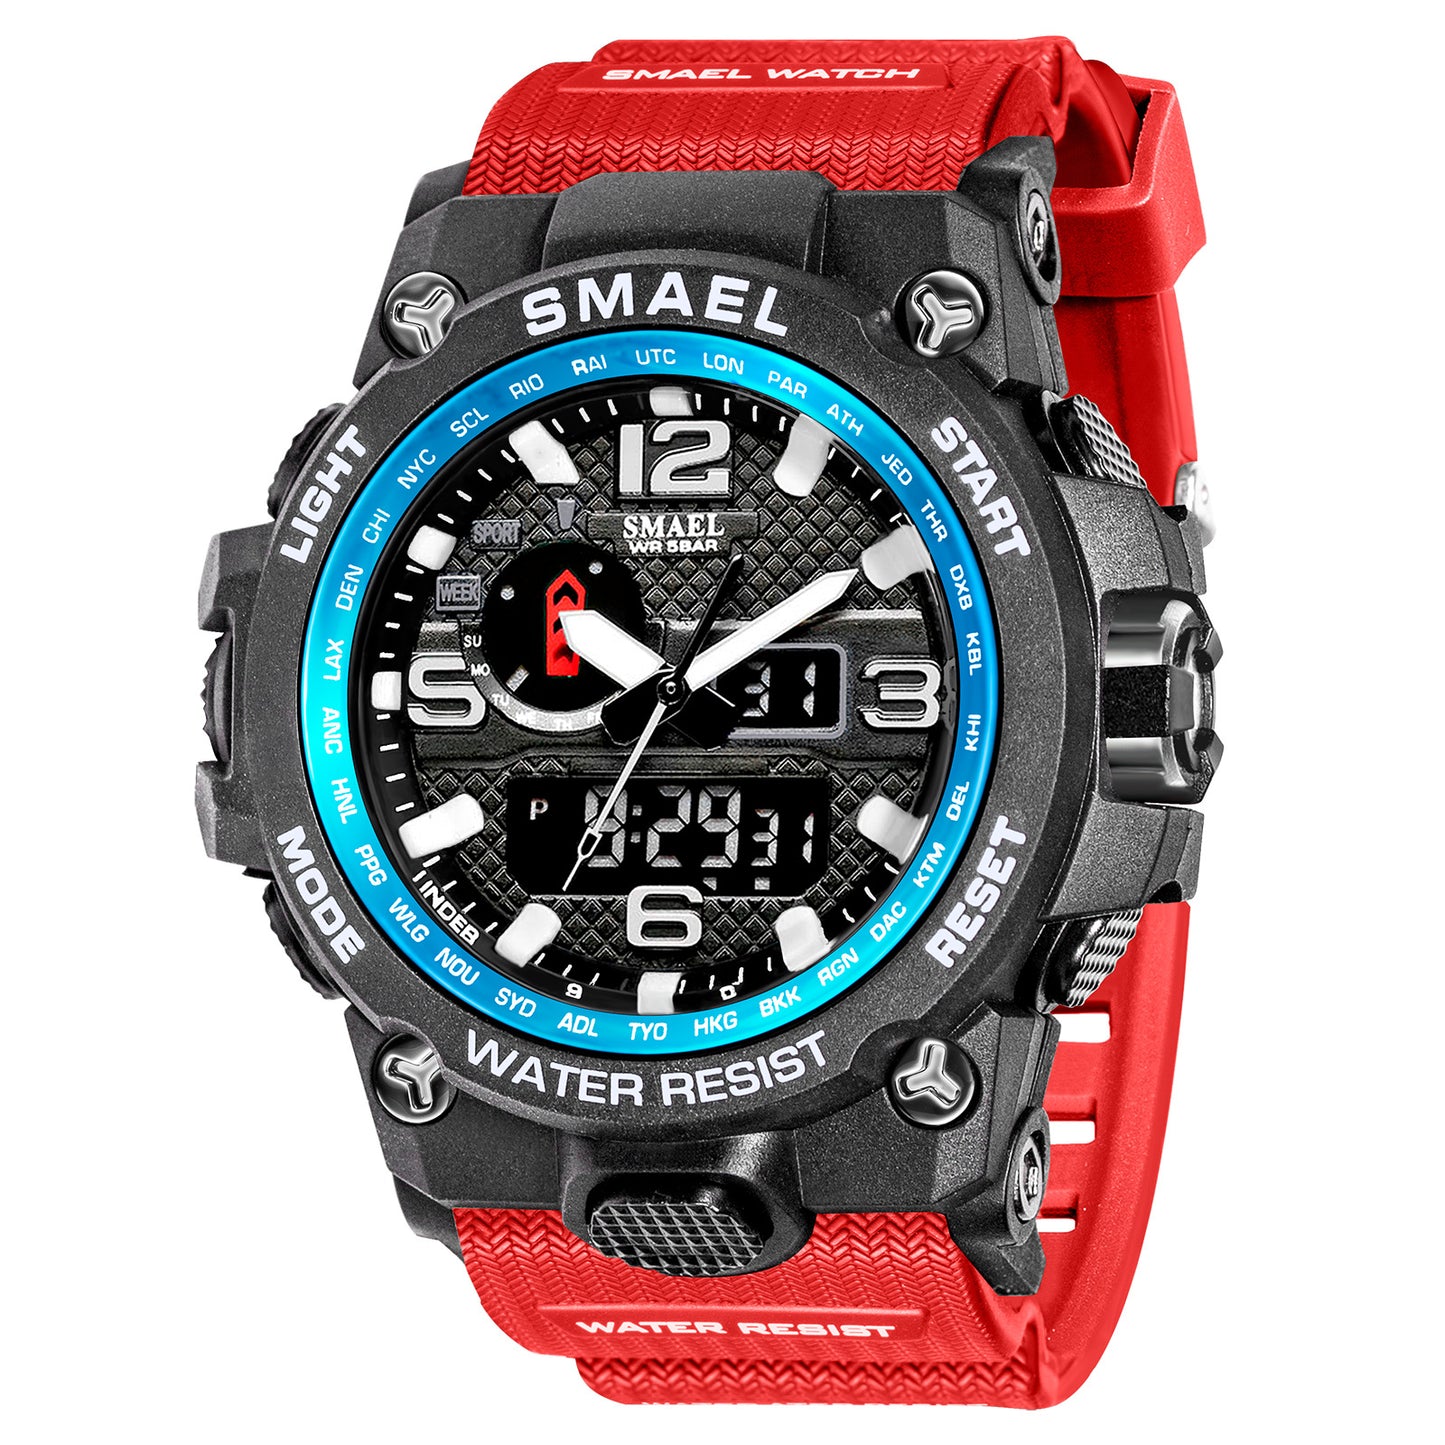 Men's Army Style Watch Waterproof Electronic Sports ShoppingLifes.com